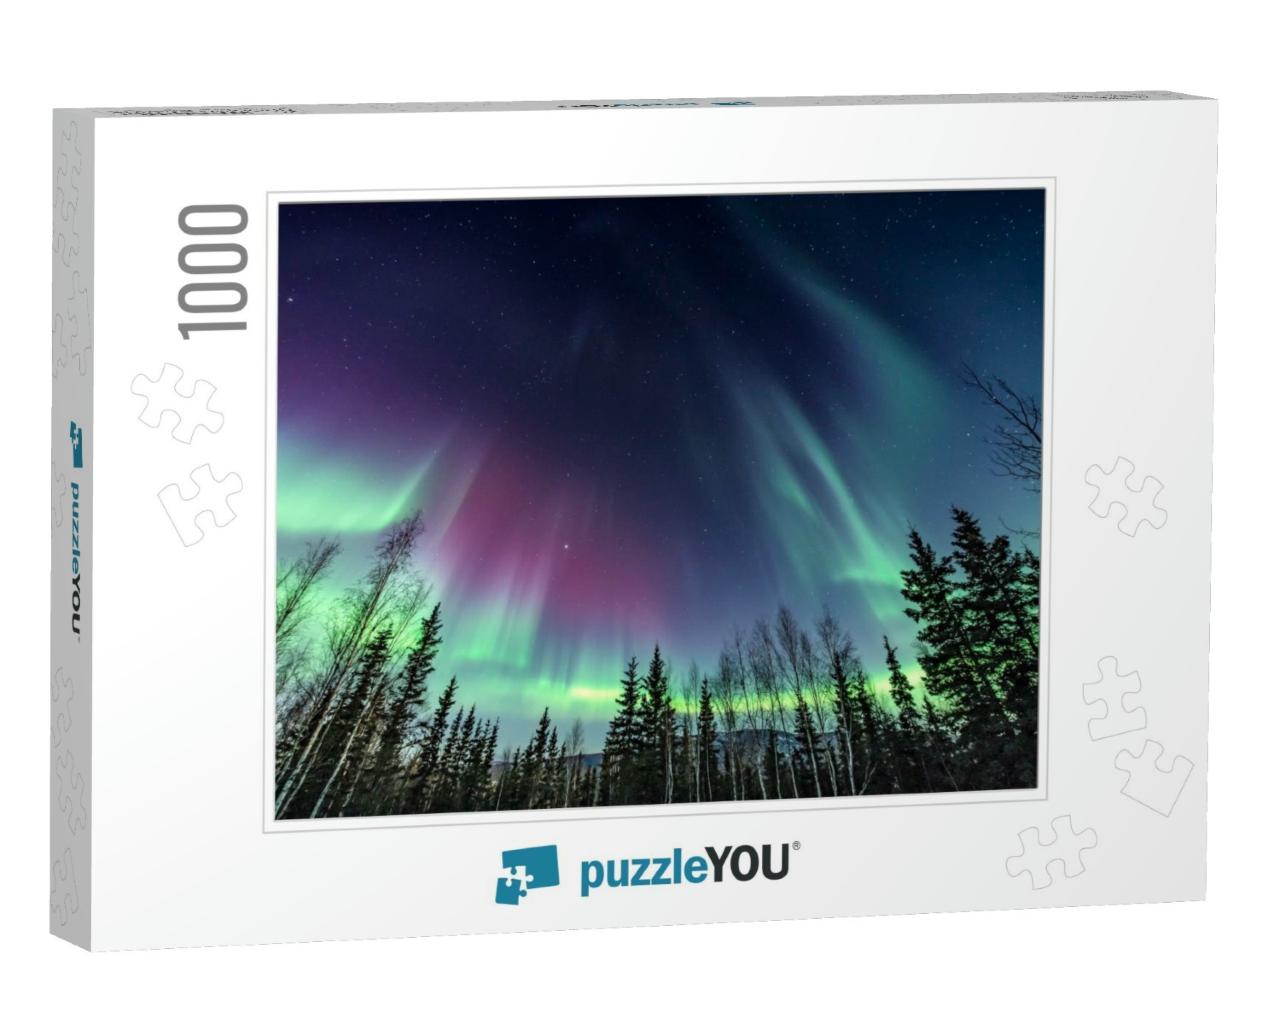 Purple & Green Northern Lights Swirling Over Pine Trees... Jigsaw Puzzle with 1000 pieces